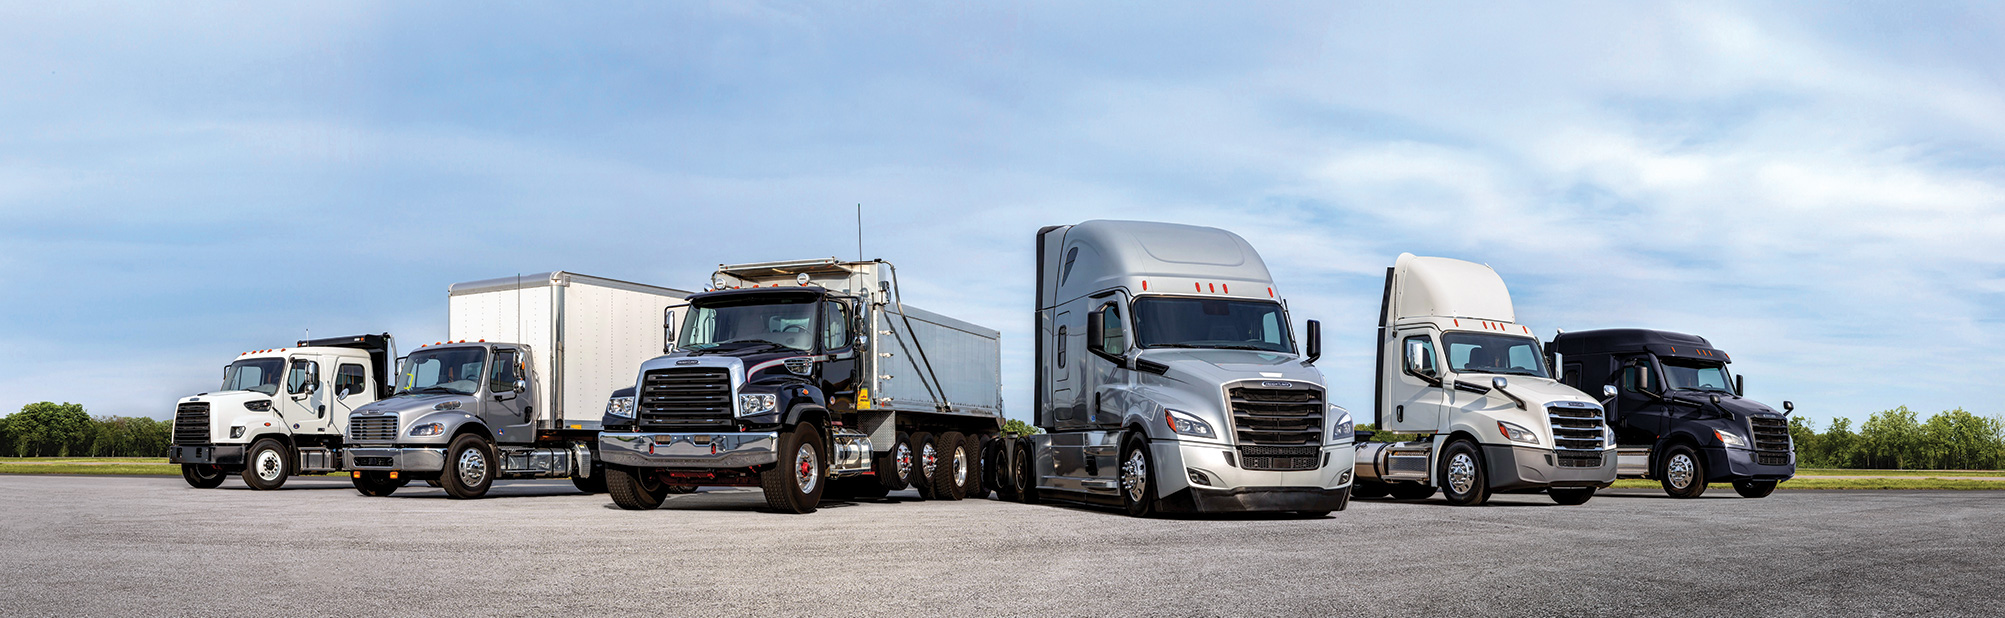 Freightliner Truck Series 114SD, 108SD, and 122SD